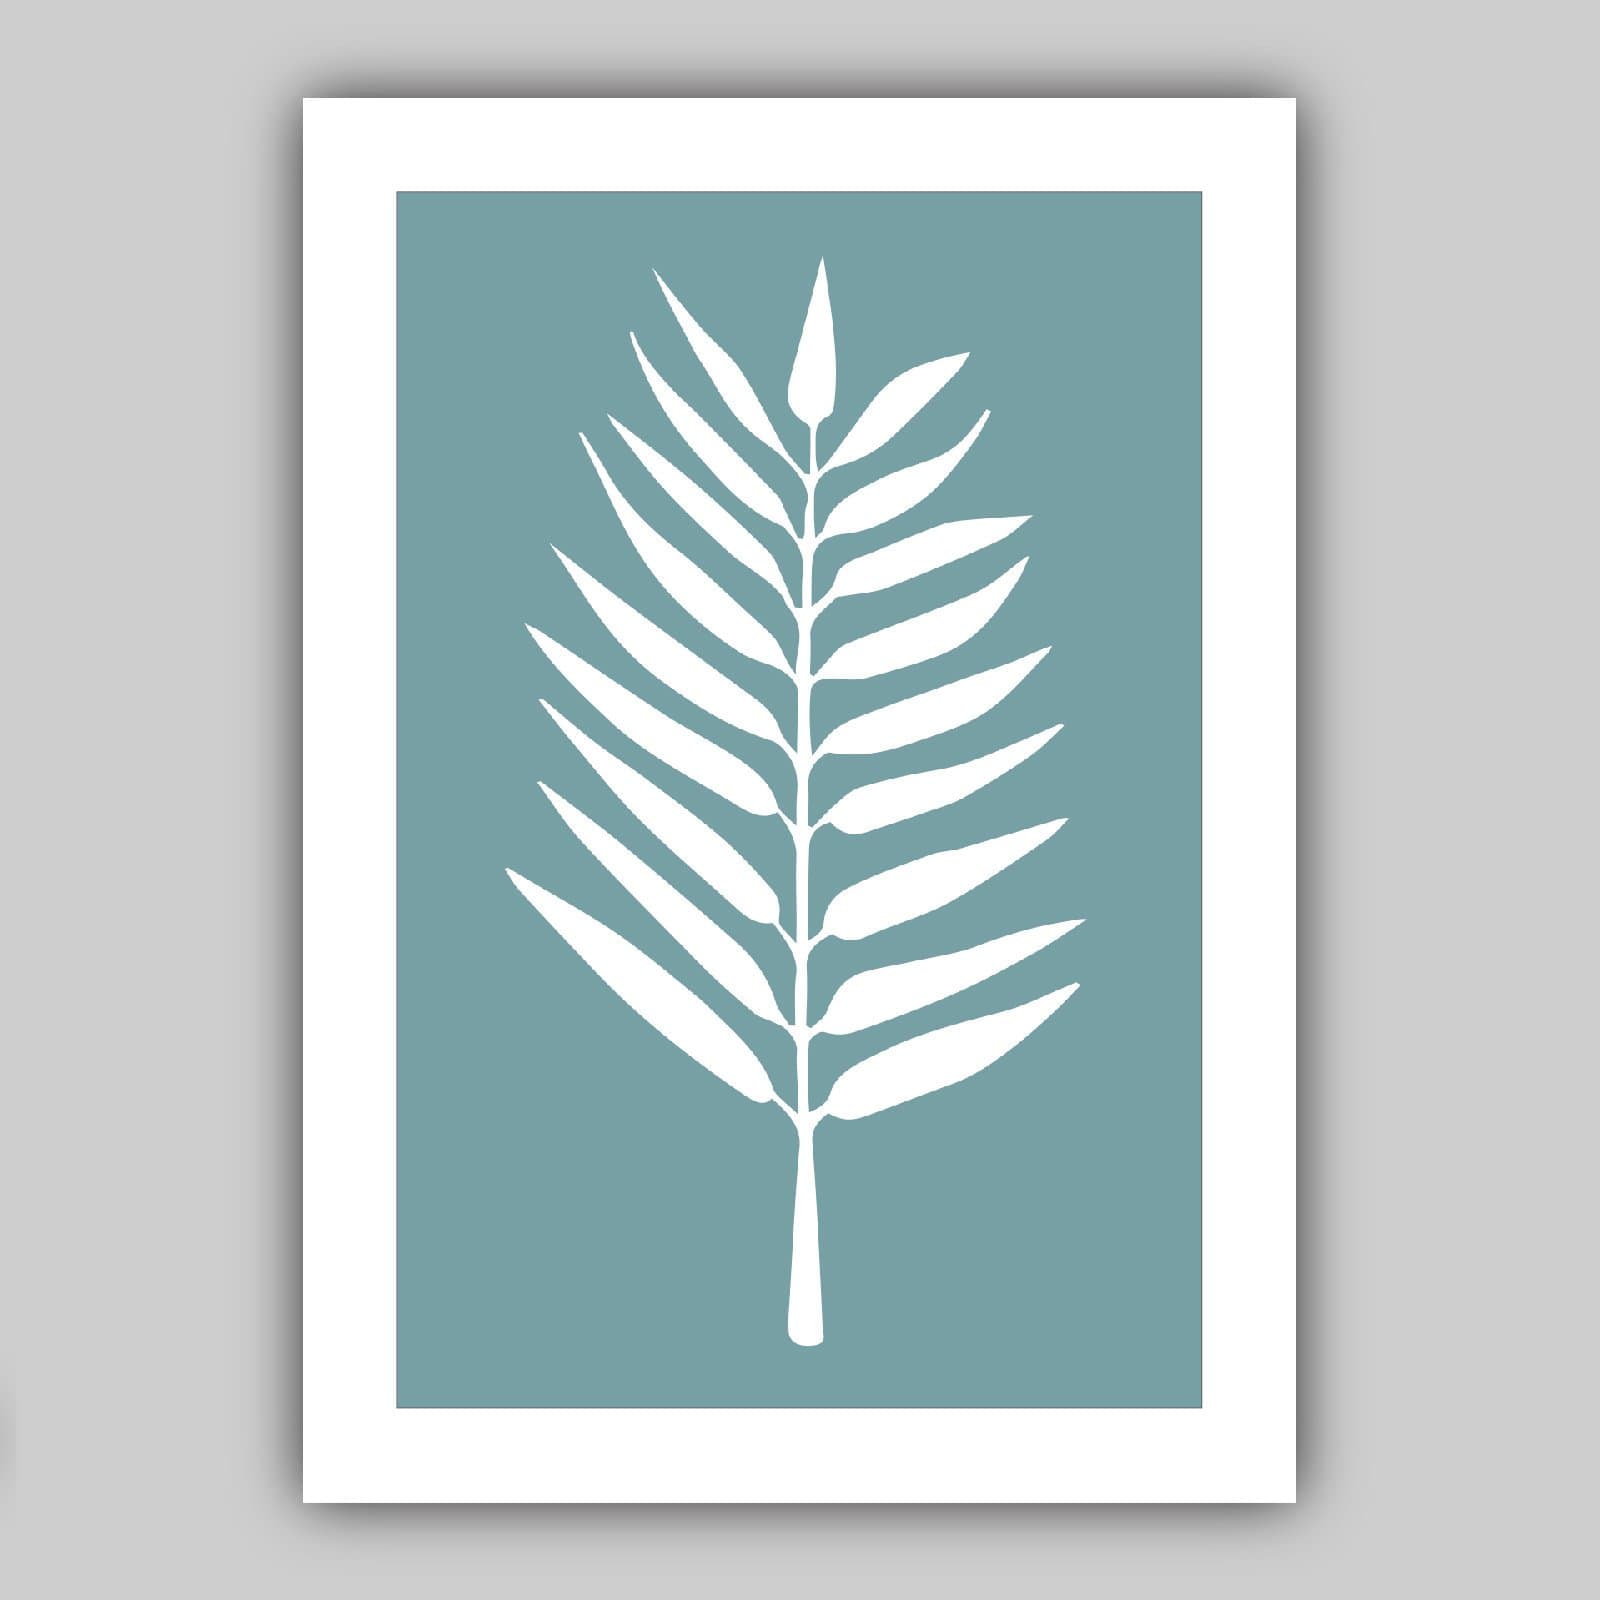 Set of 3 Grey Duck Egg Blue and White Art Prints Tropical LEAVES Botanical Leaf Wall Scandinavian Pictures Posters Minimalist Artwork